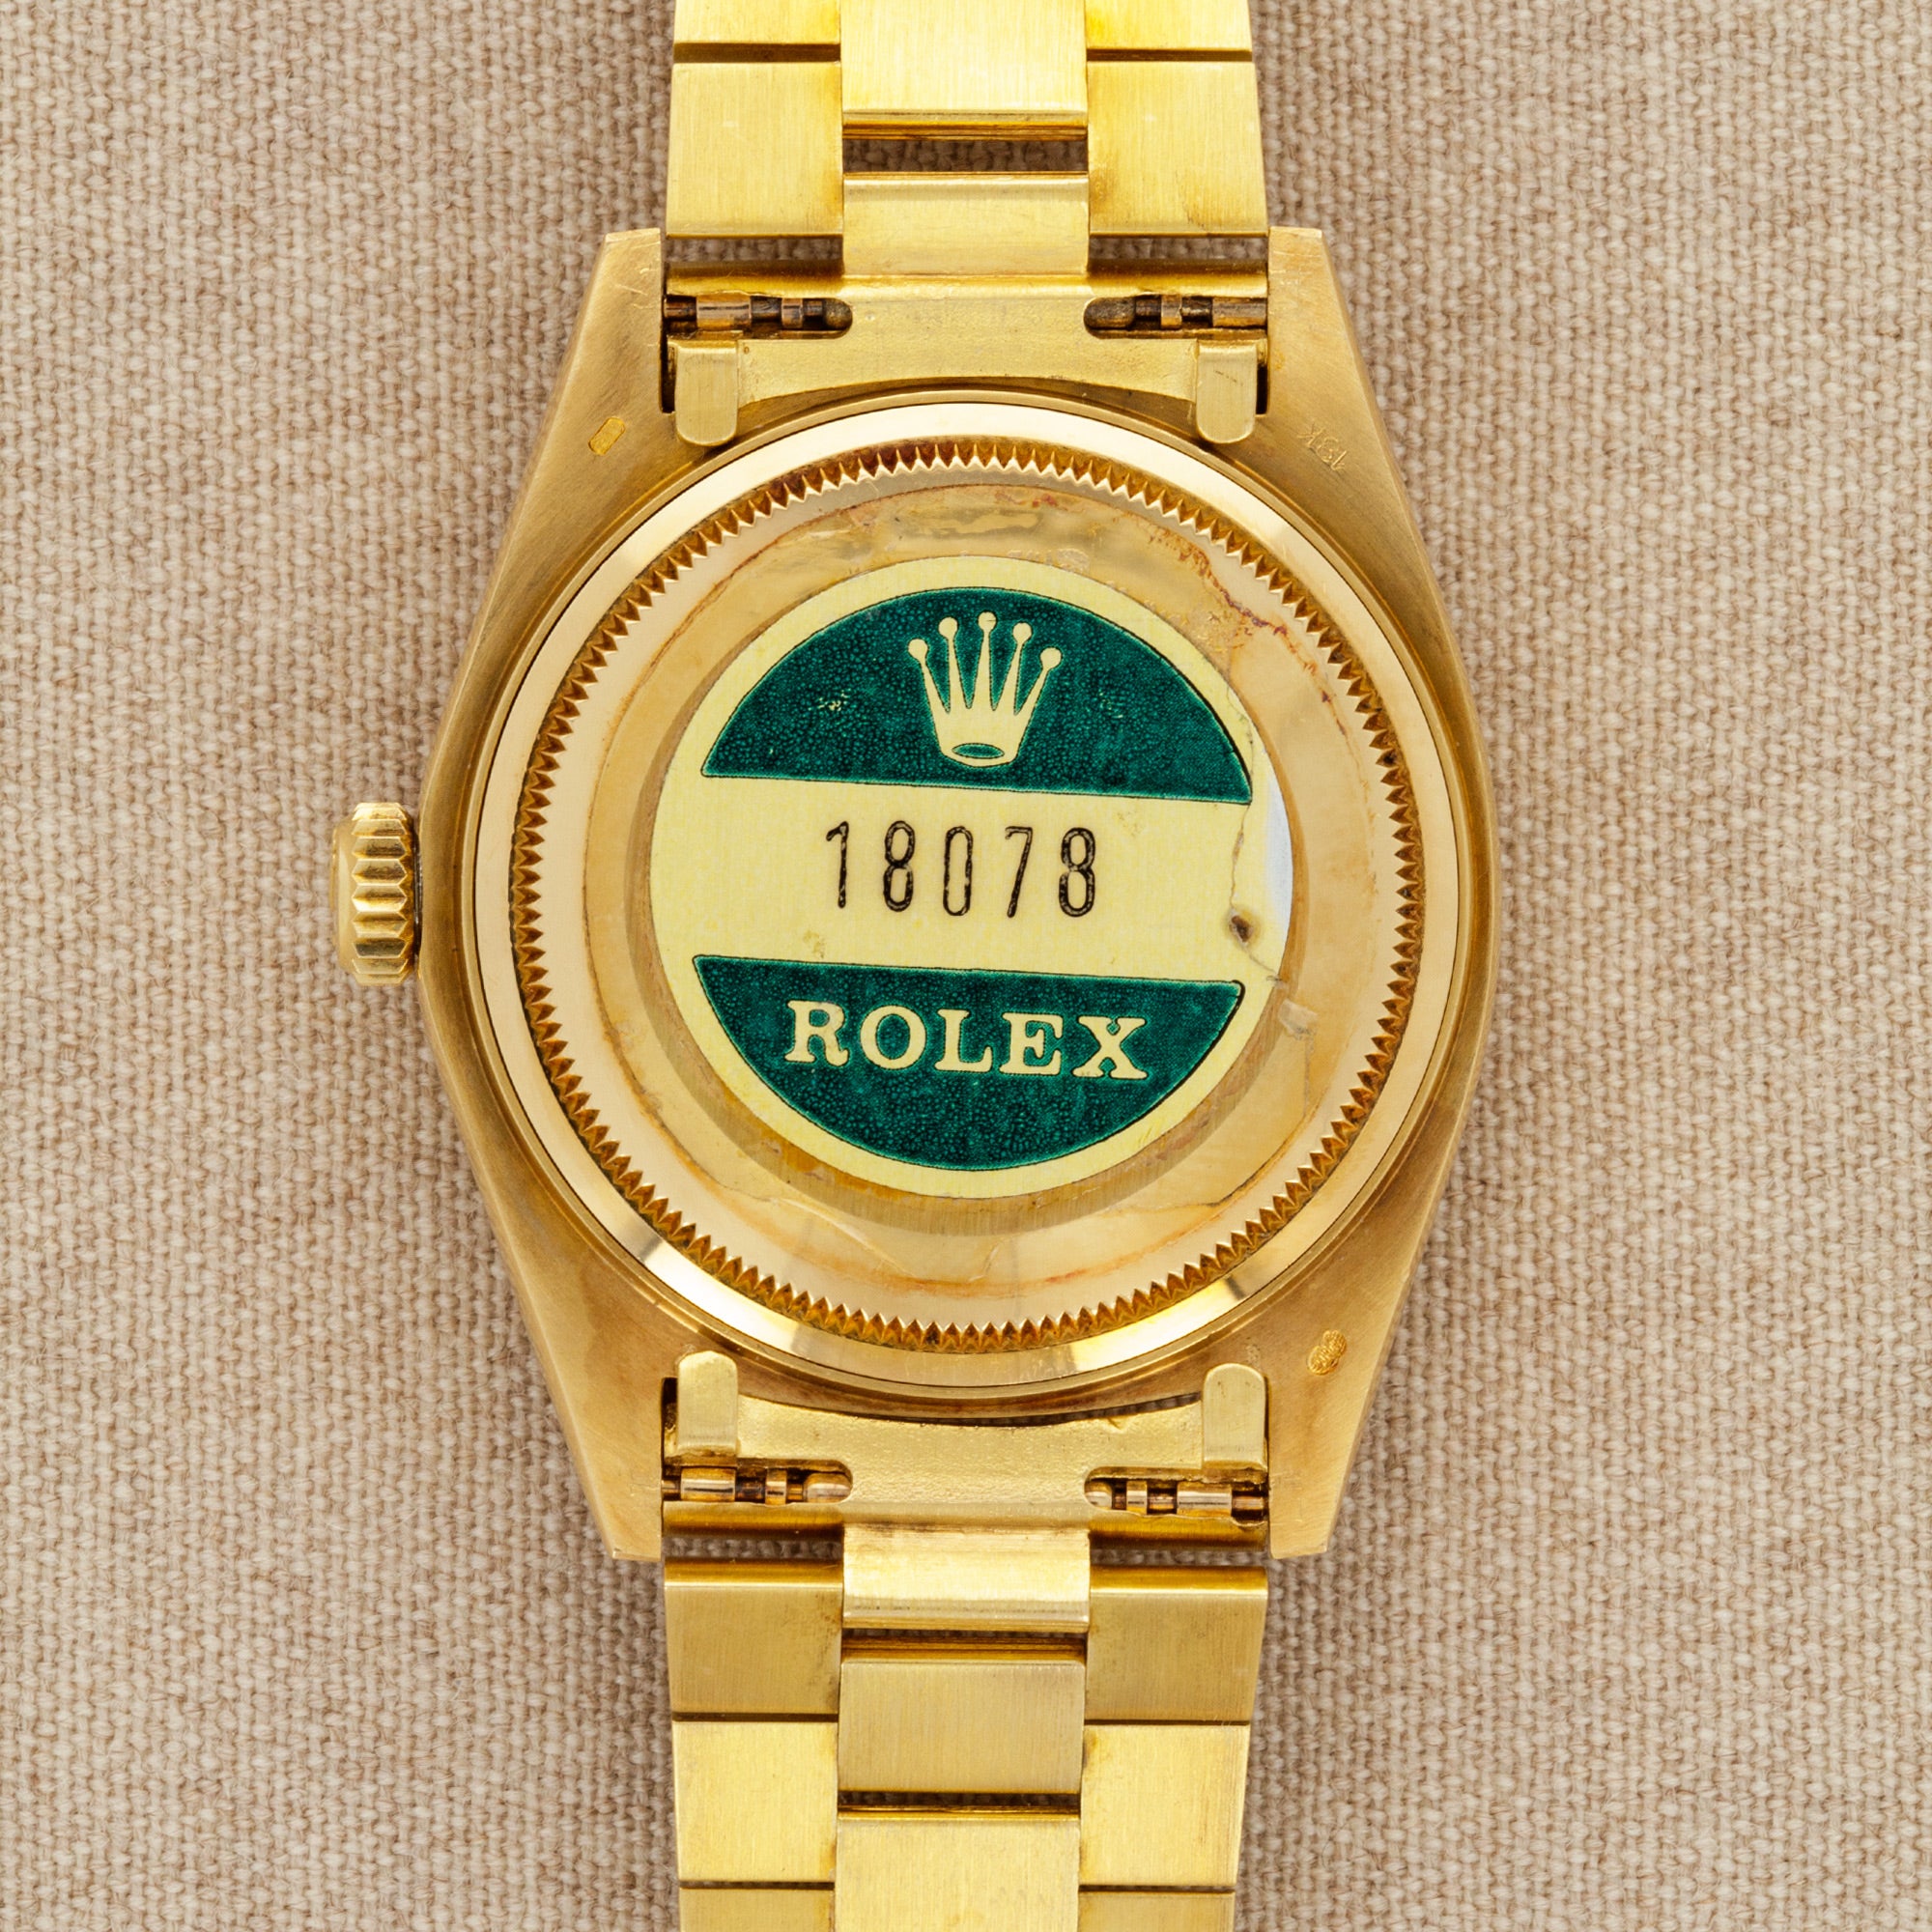 Rolex - Rolex Yellow Gold Day-Date Ref. 18078 in Outstanding Condition with Original Bark Finish - The Keystone Watches